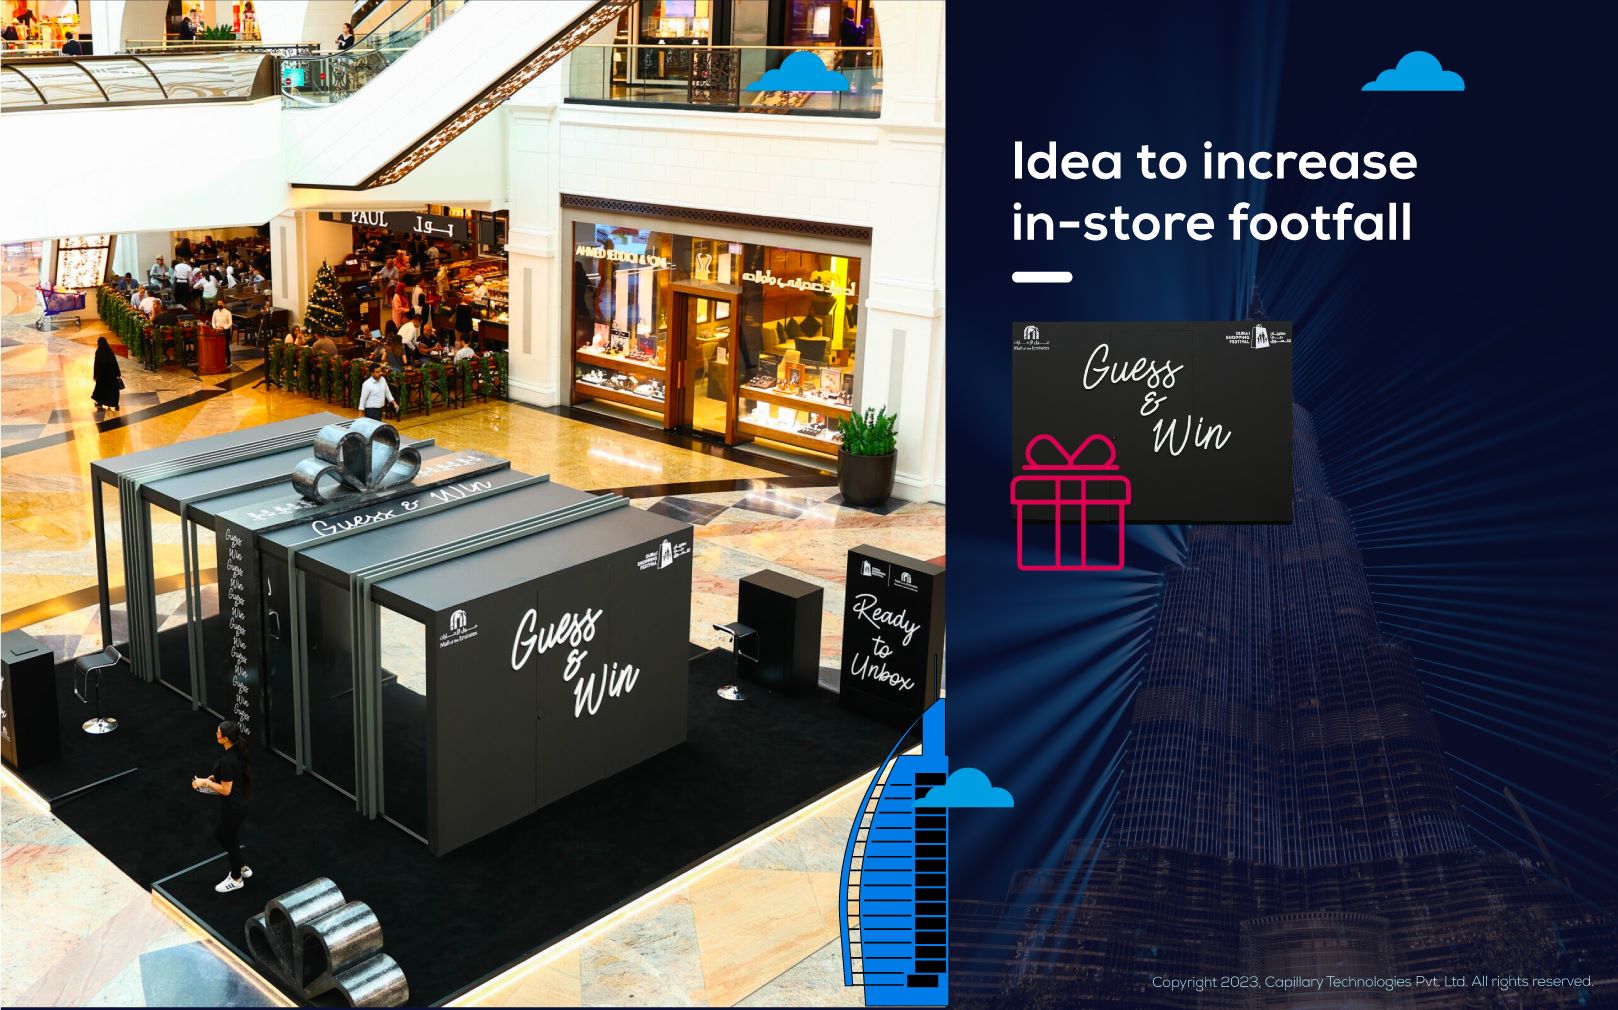 DSF black box - An idea to increase in-store footfalls